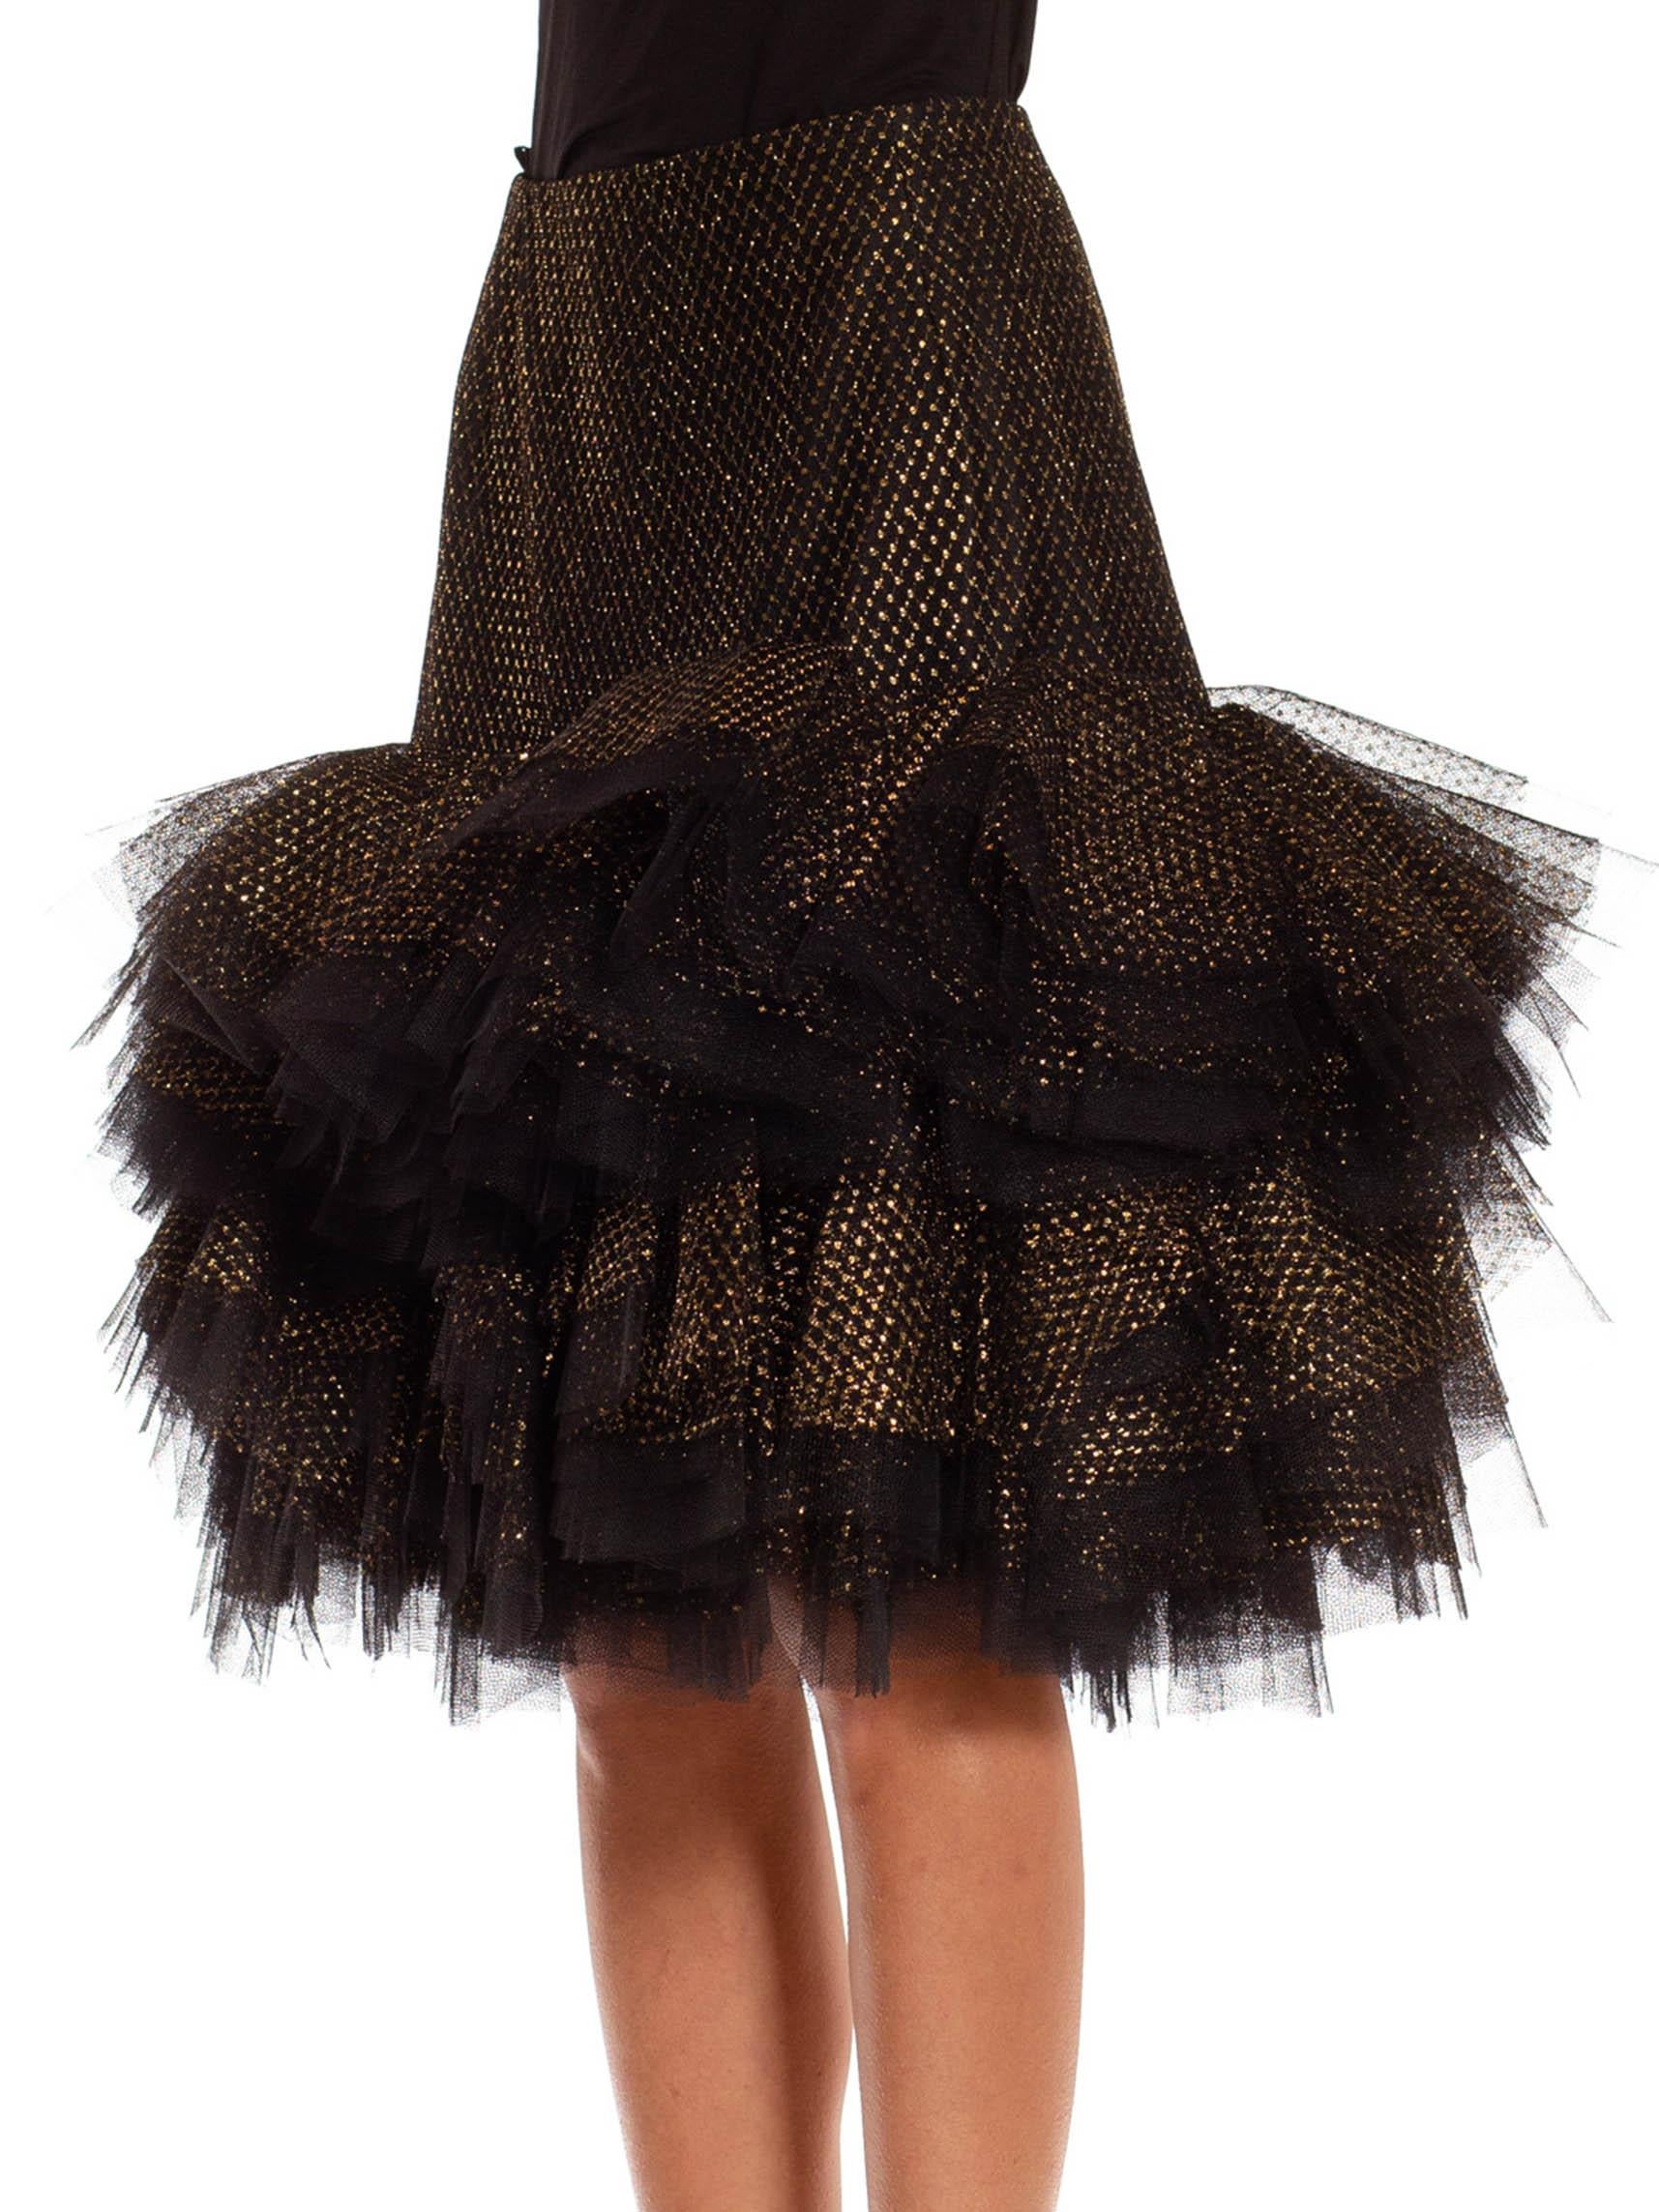 1980S Jacqueline De Ribes Black & Gold Tulle Tiered Polka Dot Skirt For Sale 3